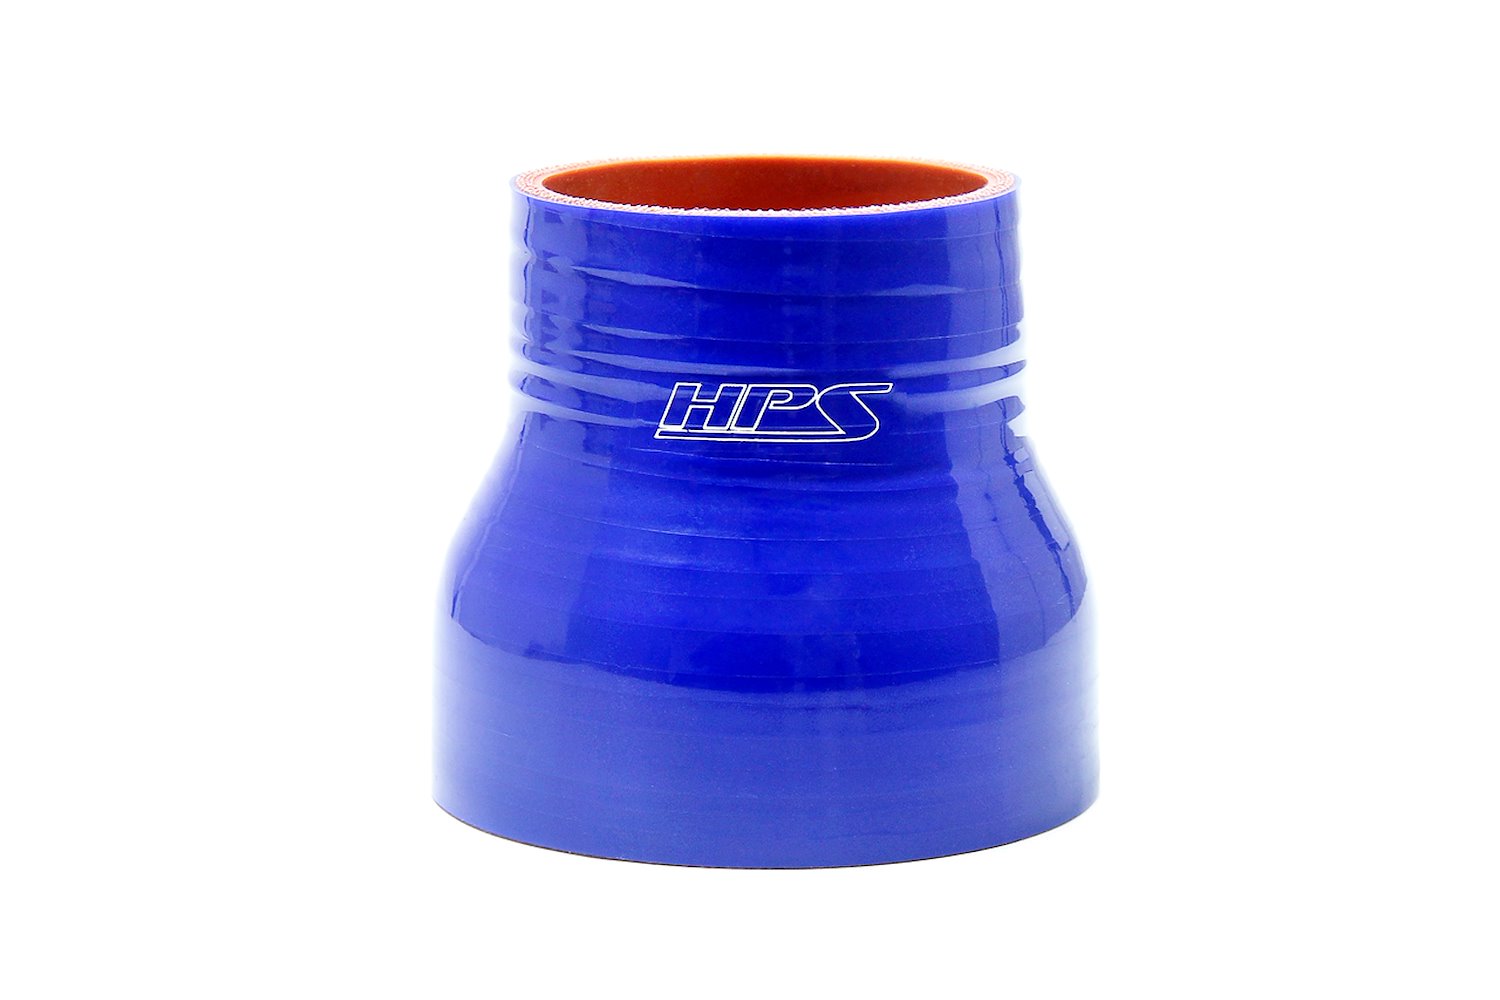 HTSR-200-238-L4-BLUE Silicone Reducer Hose, High-Temp 4-Ply Reinforced, 2 in. - 2-3/8 in. ID, 4 in. Long, Blue